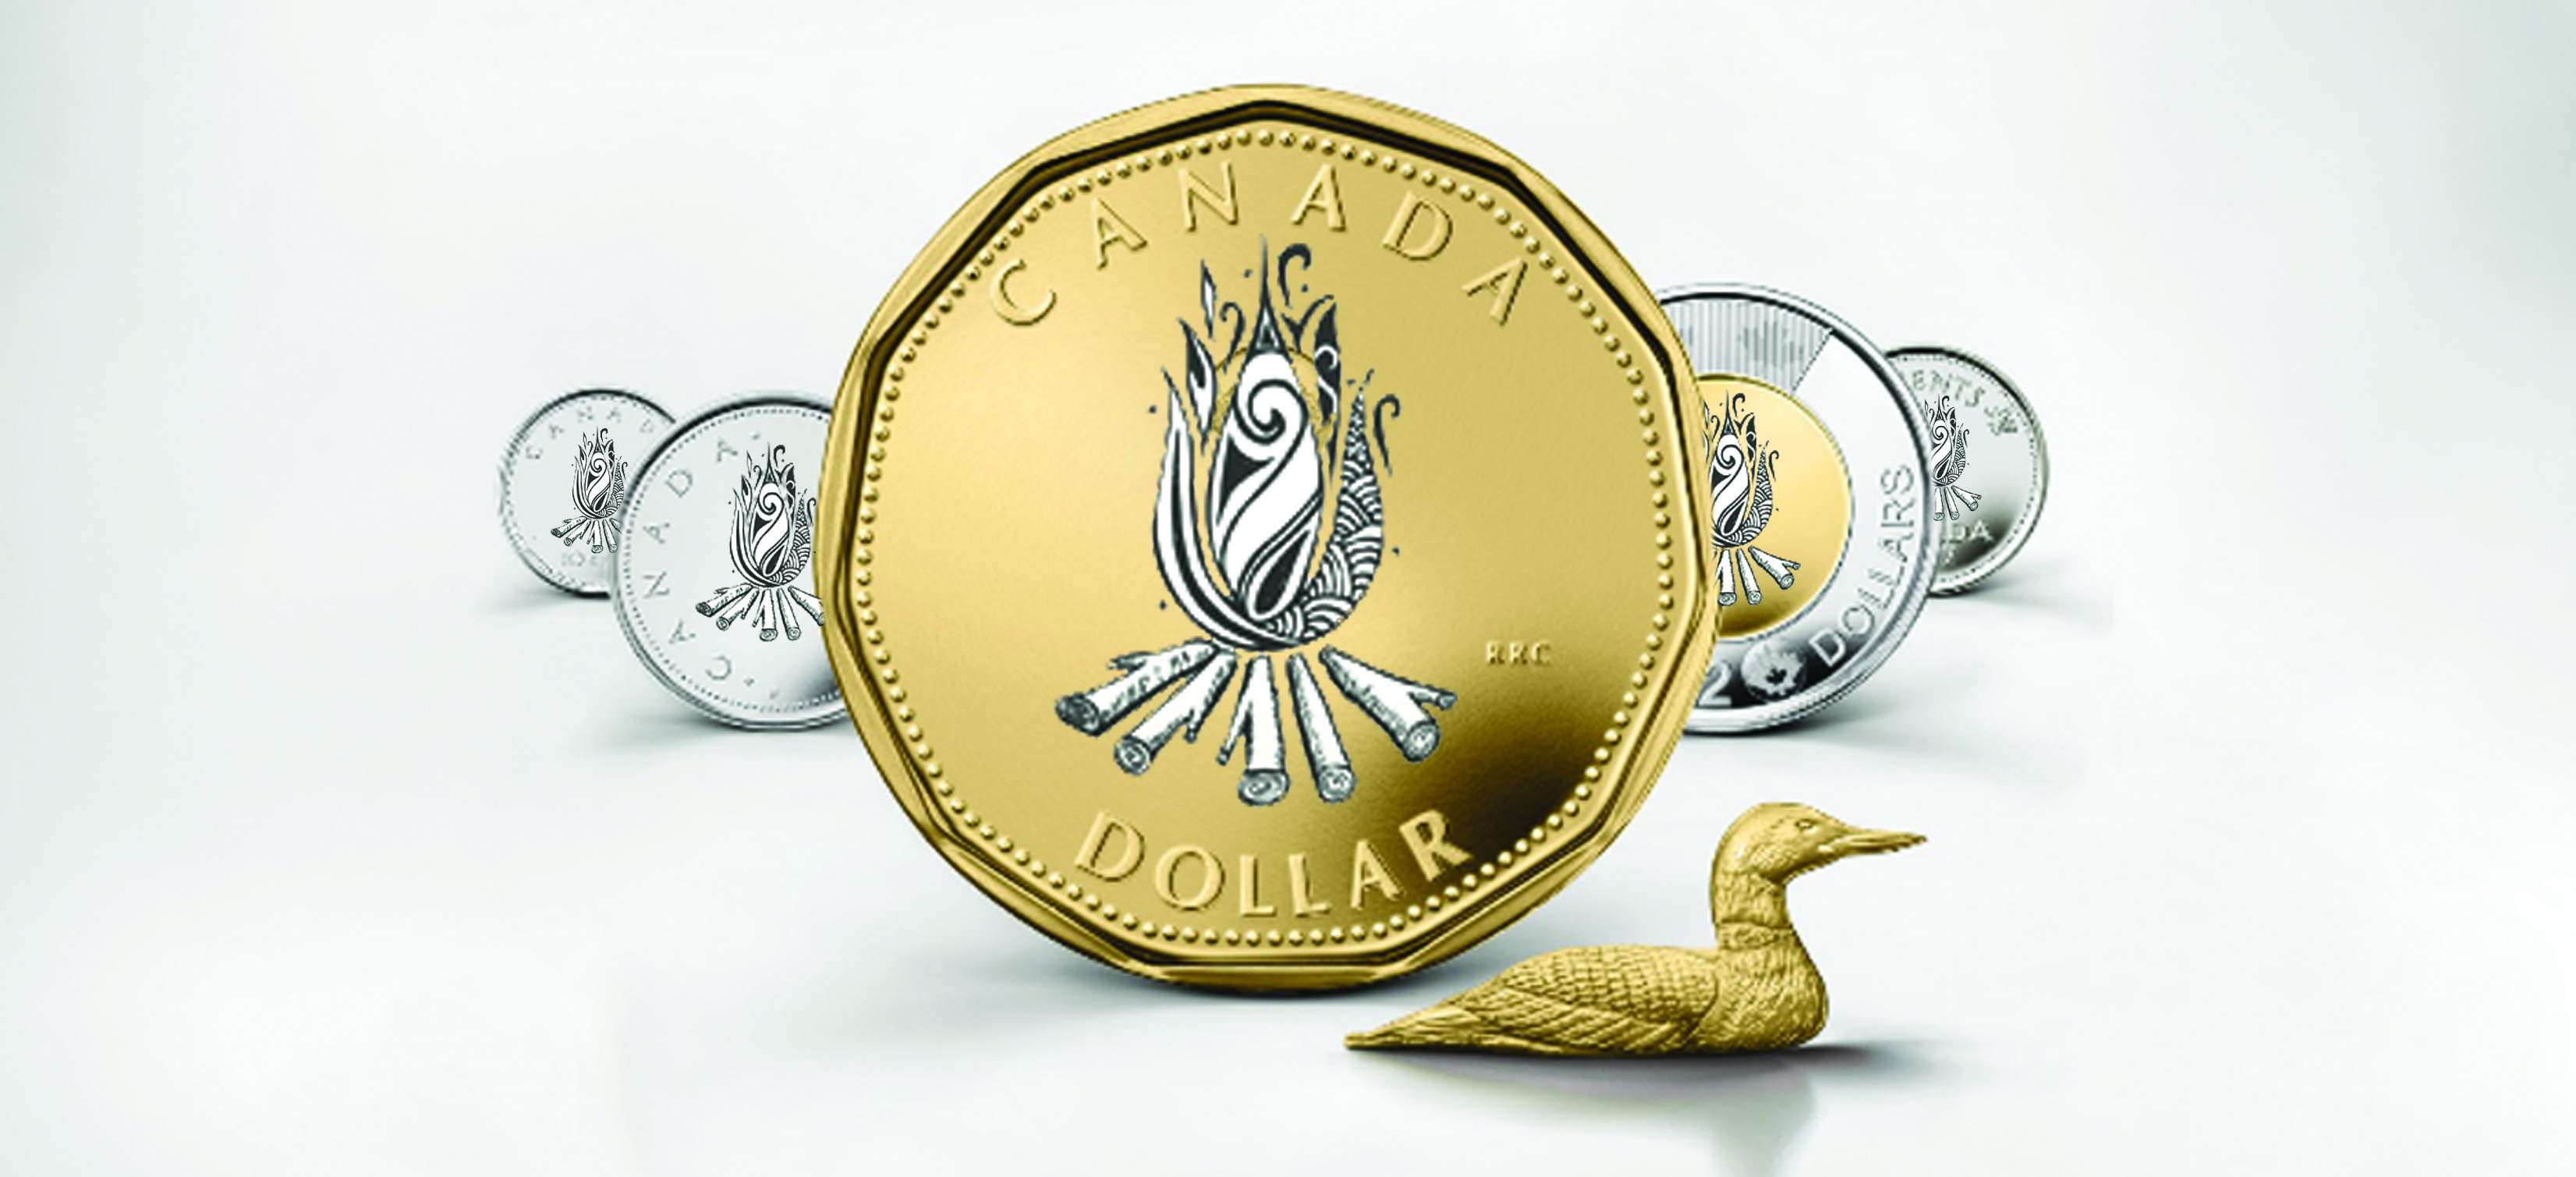 Canadian Mint Coin Contest